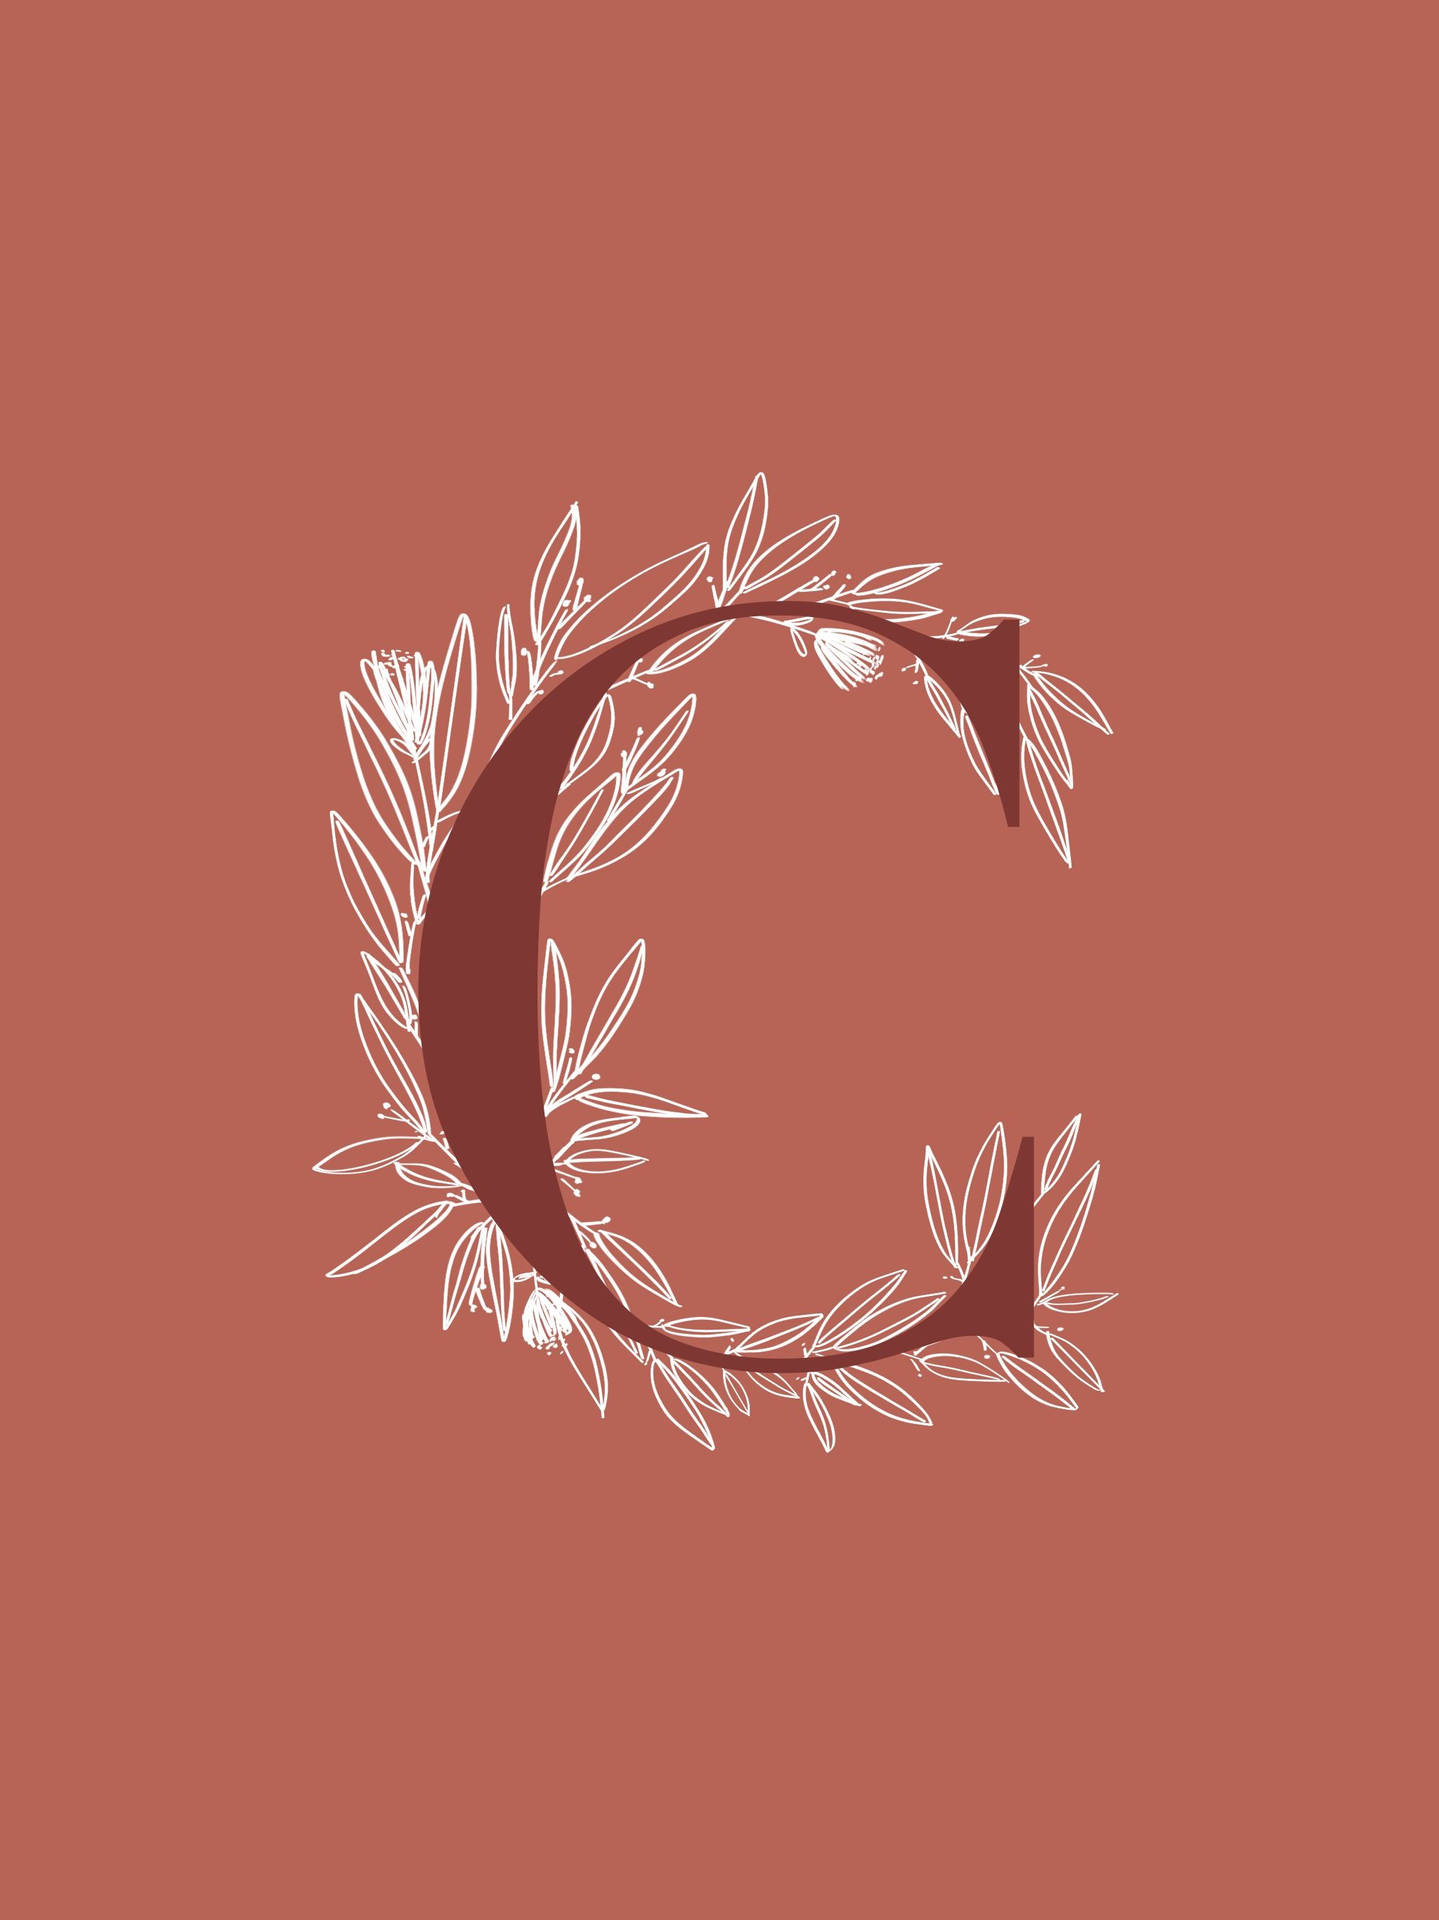 Aesthetic Letter C With Leaves Background